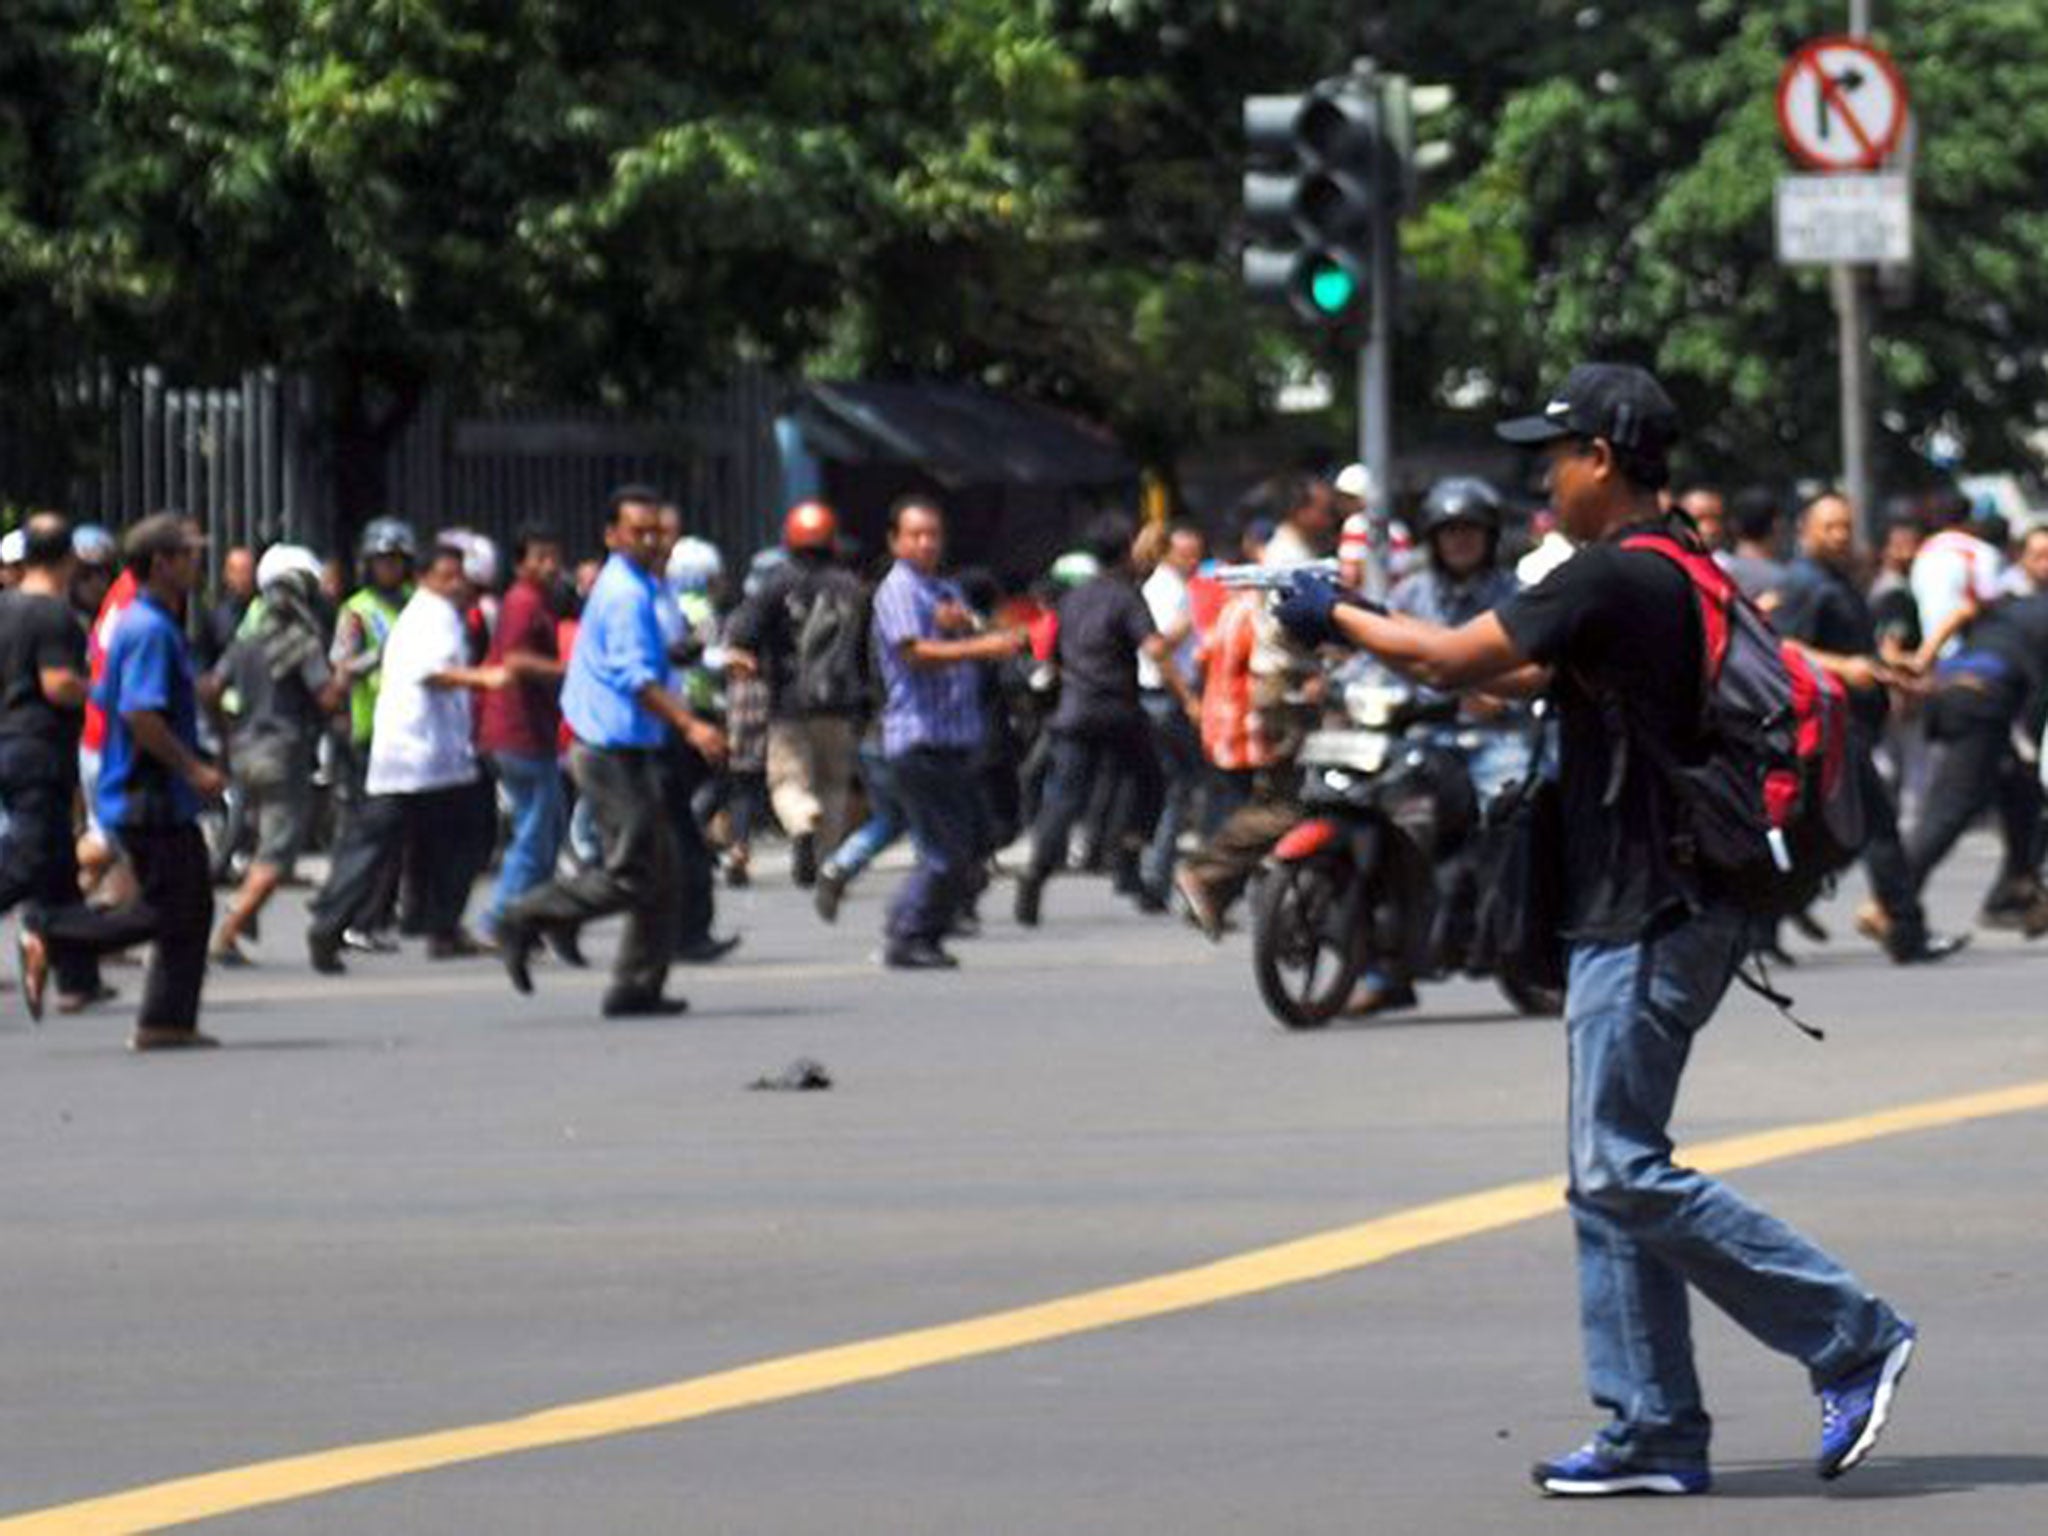 Moment of terror... a man points a gun towards a crowd of people in central Jakarta